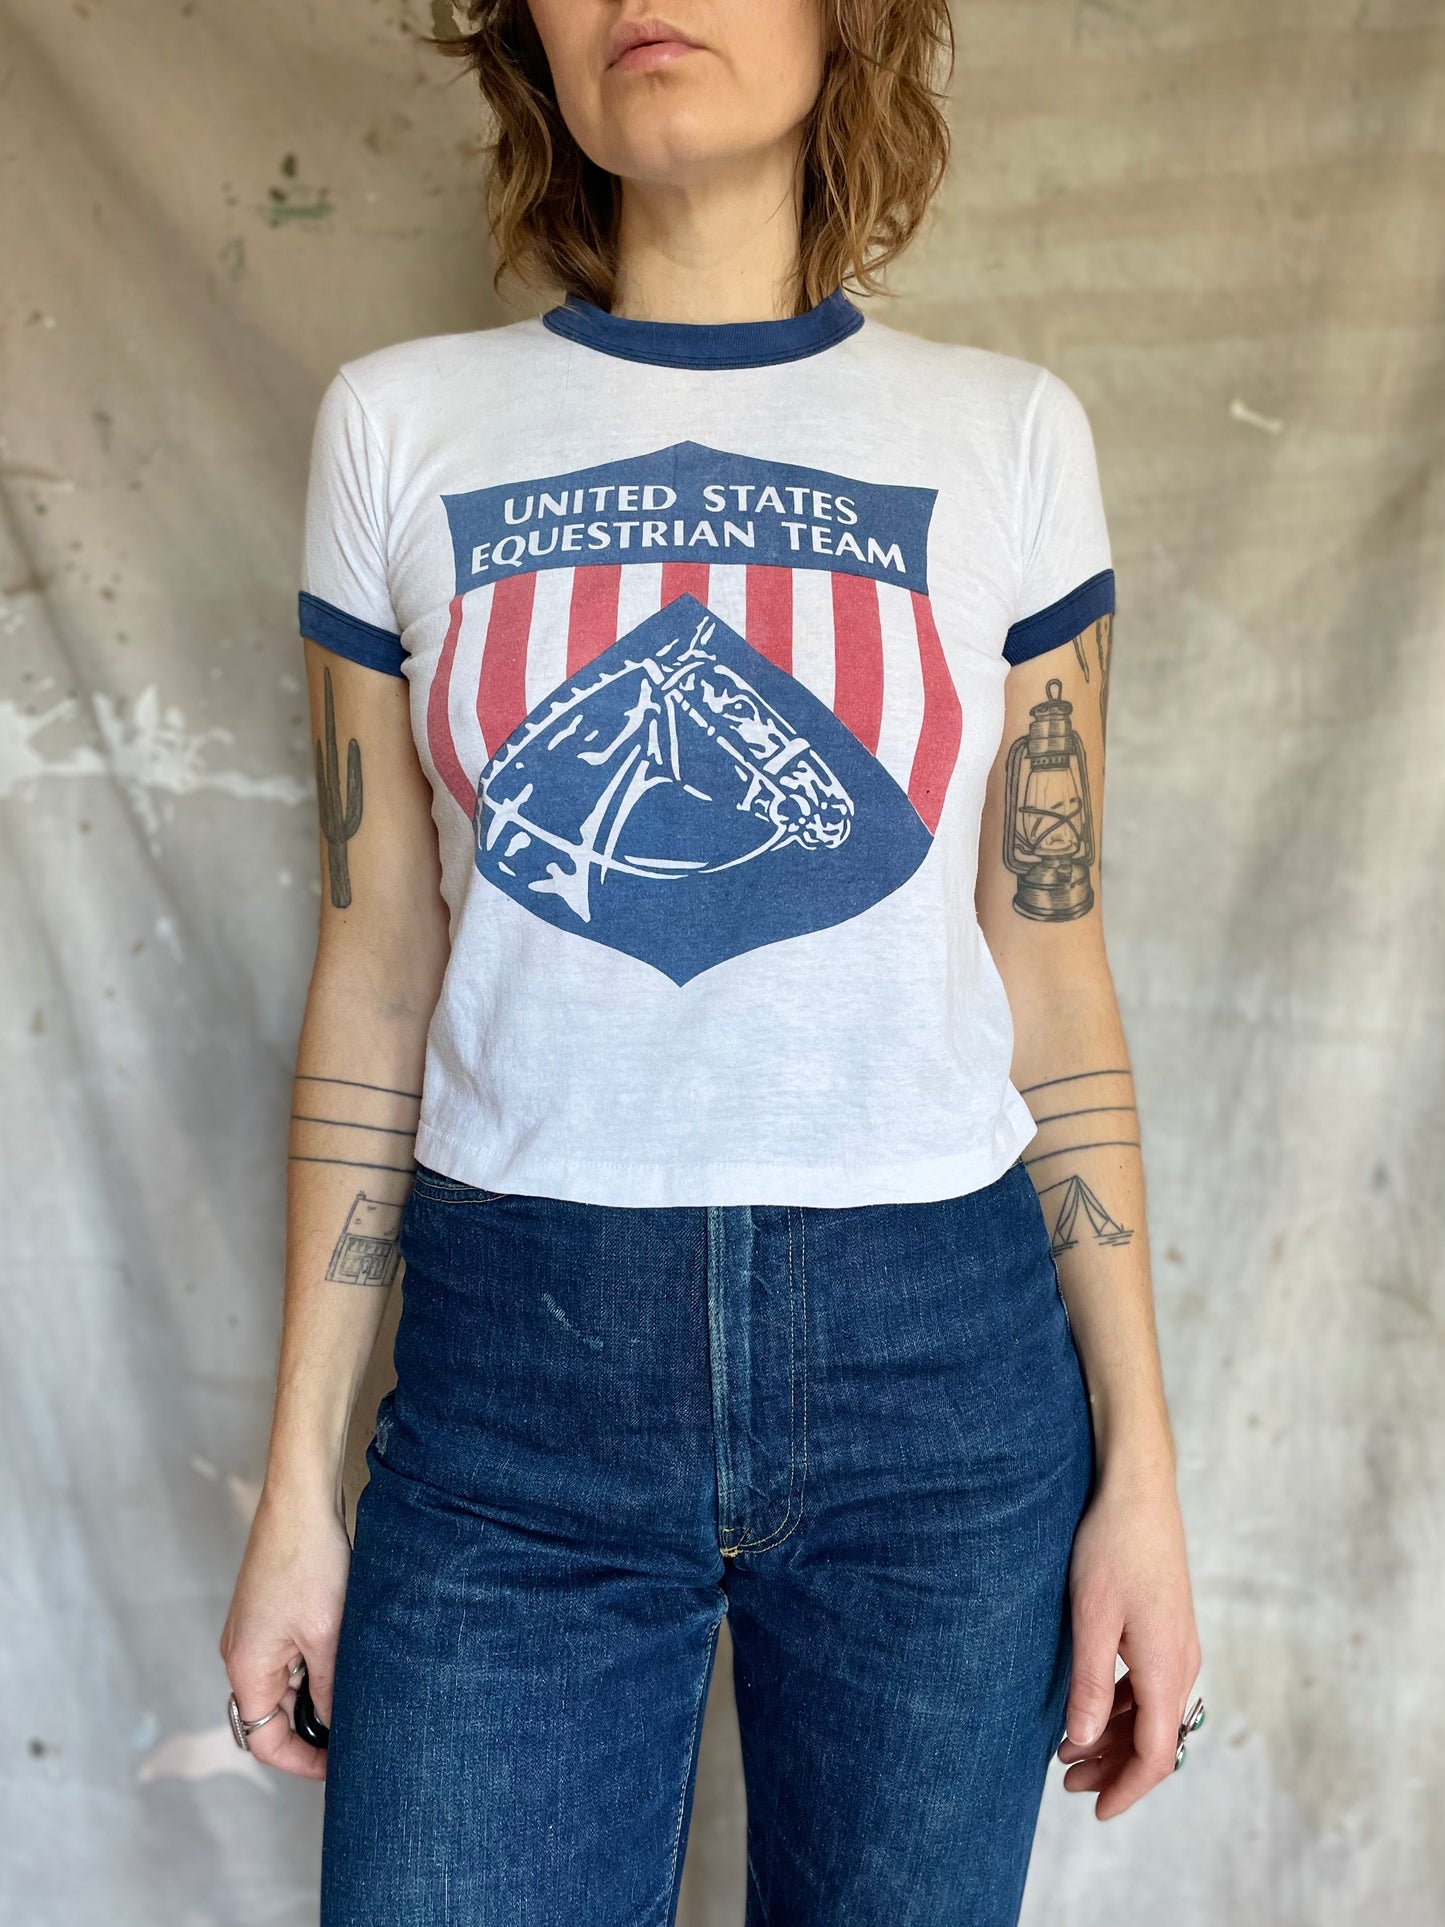 80s United States Equestrian Team Tee